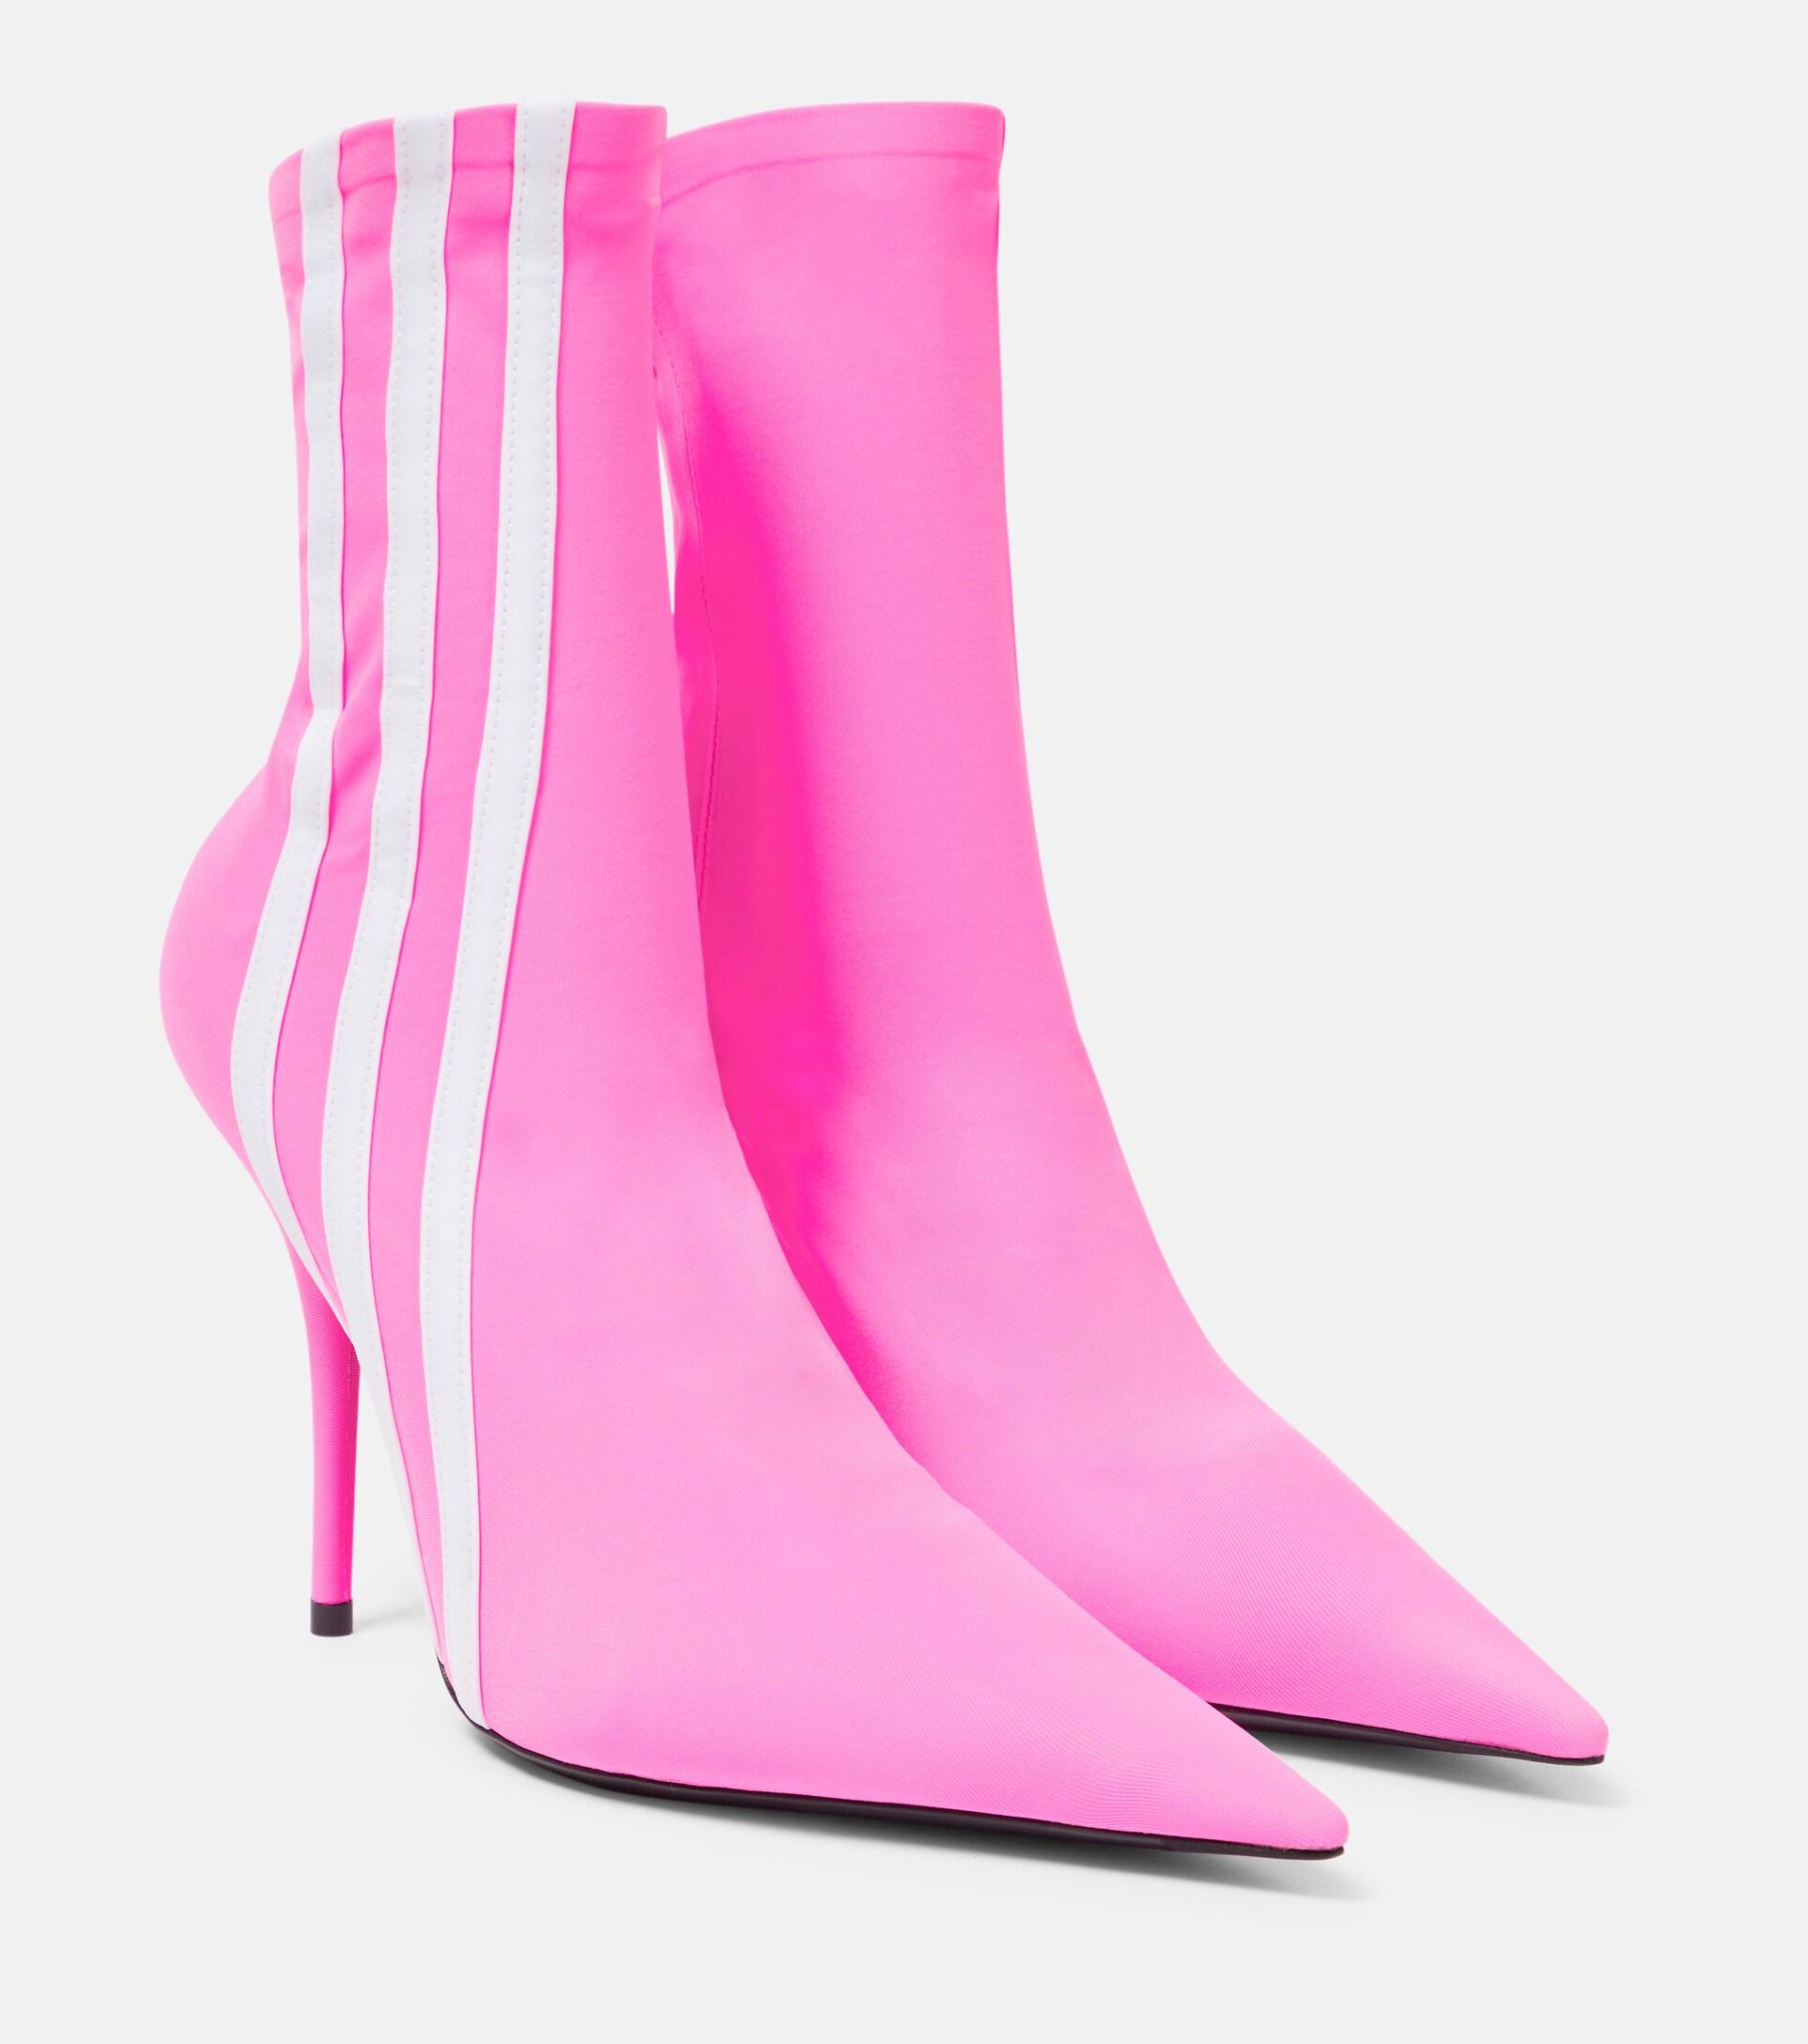 Balenciaga X Adidas Knife Sock Ankle Boots in Pink | Lyst